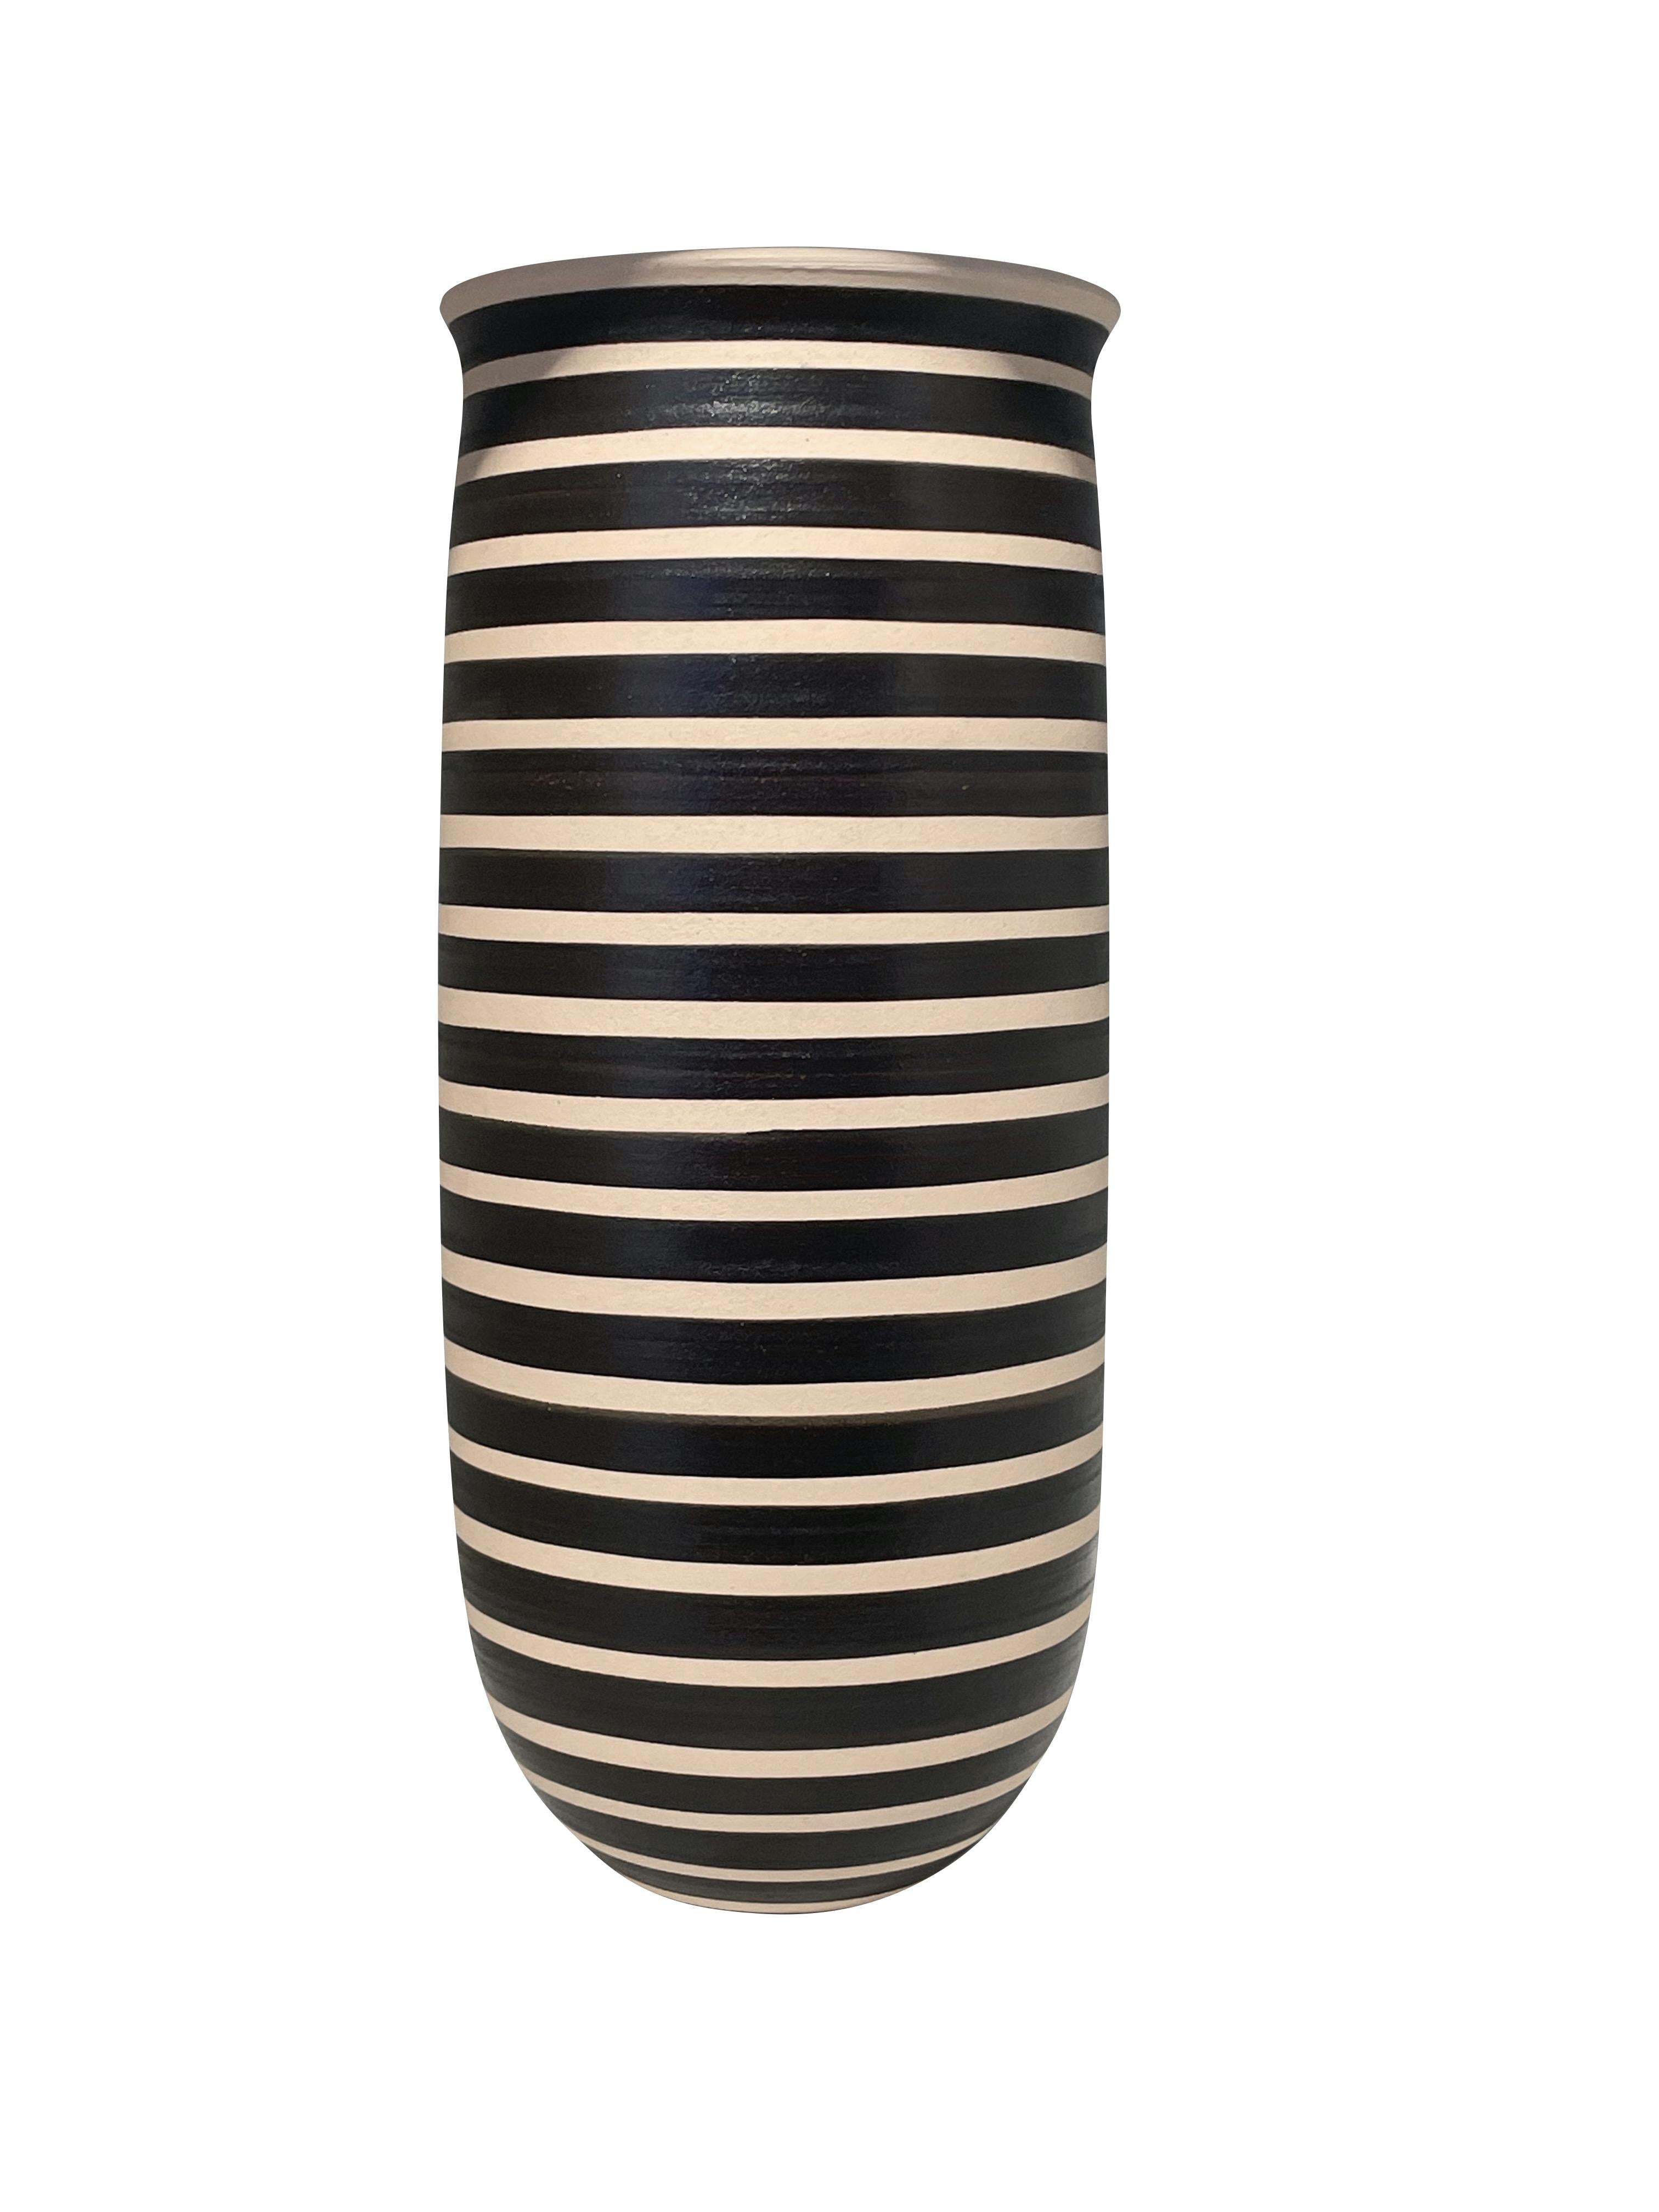 Contemporary Turkish handmade black and cream tall wide band stripe vase.
Wide opening.
Can hold water.
Two available and sold individually.
From a large collection.